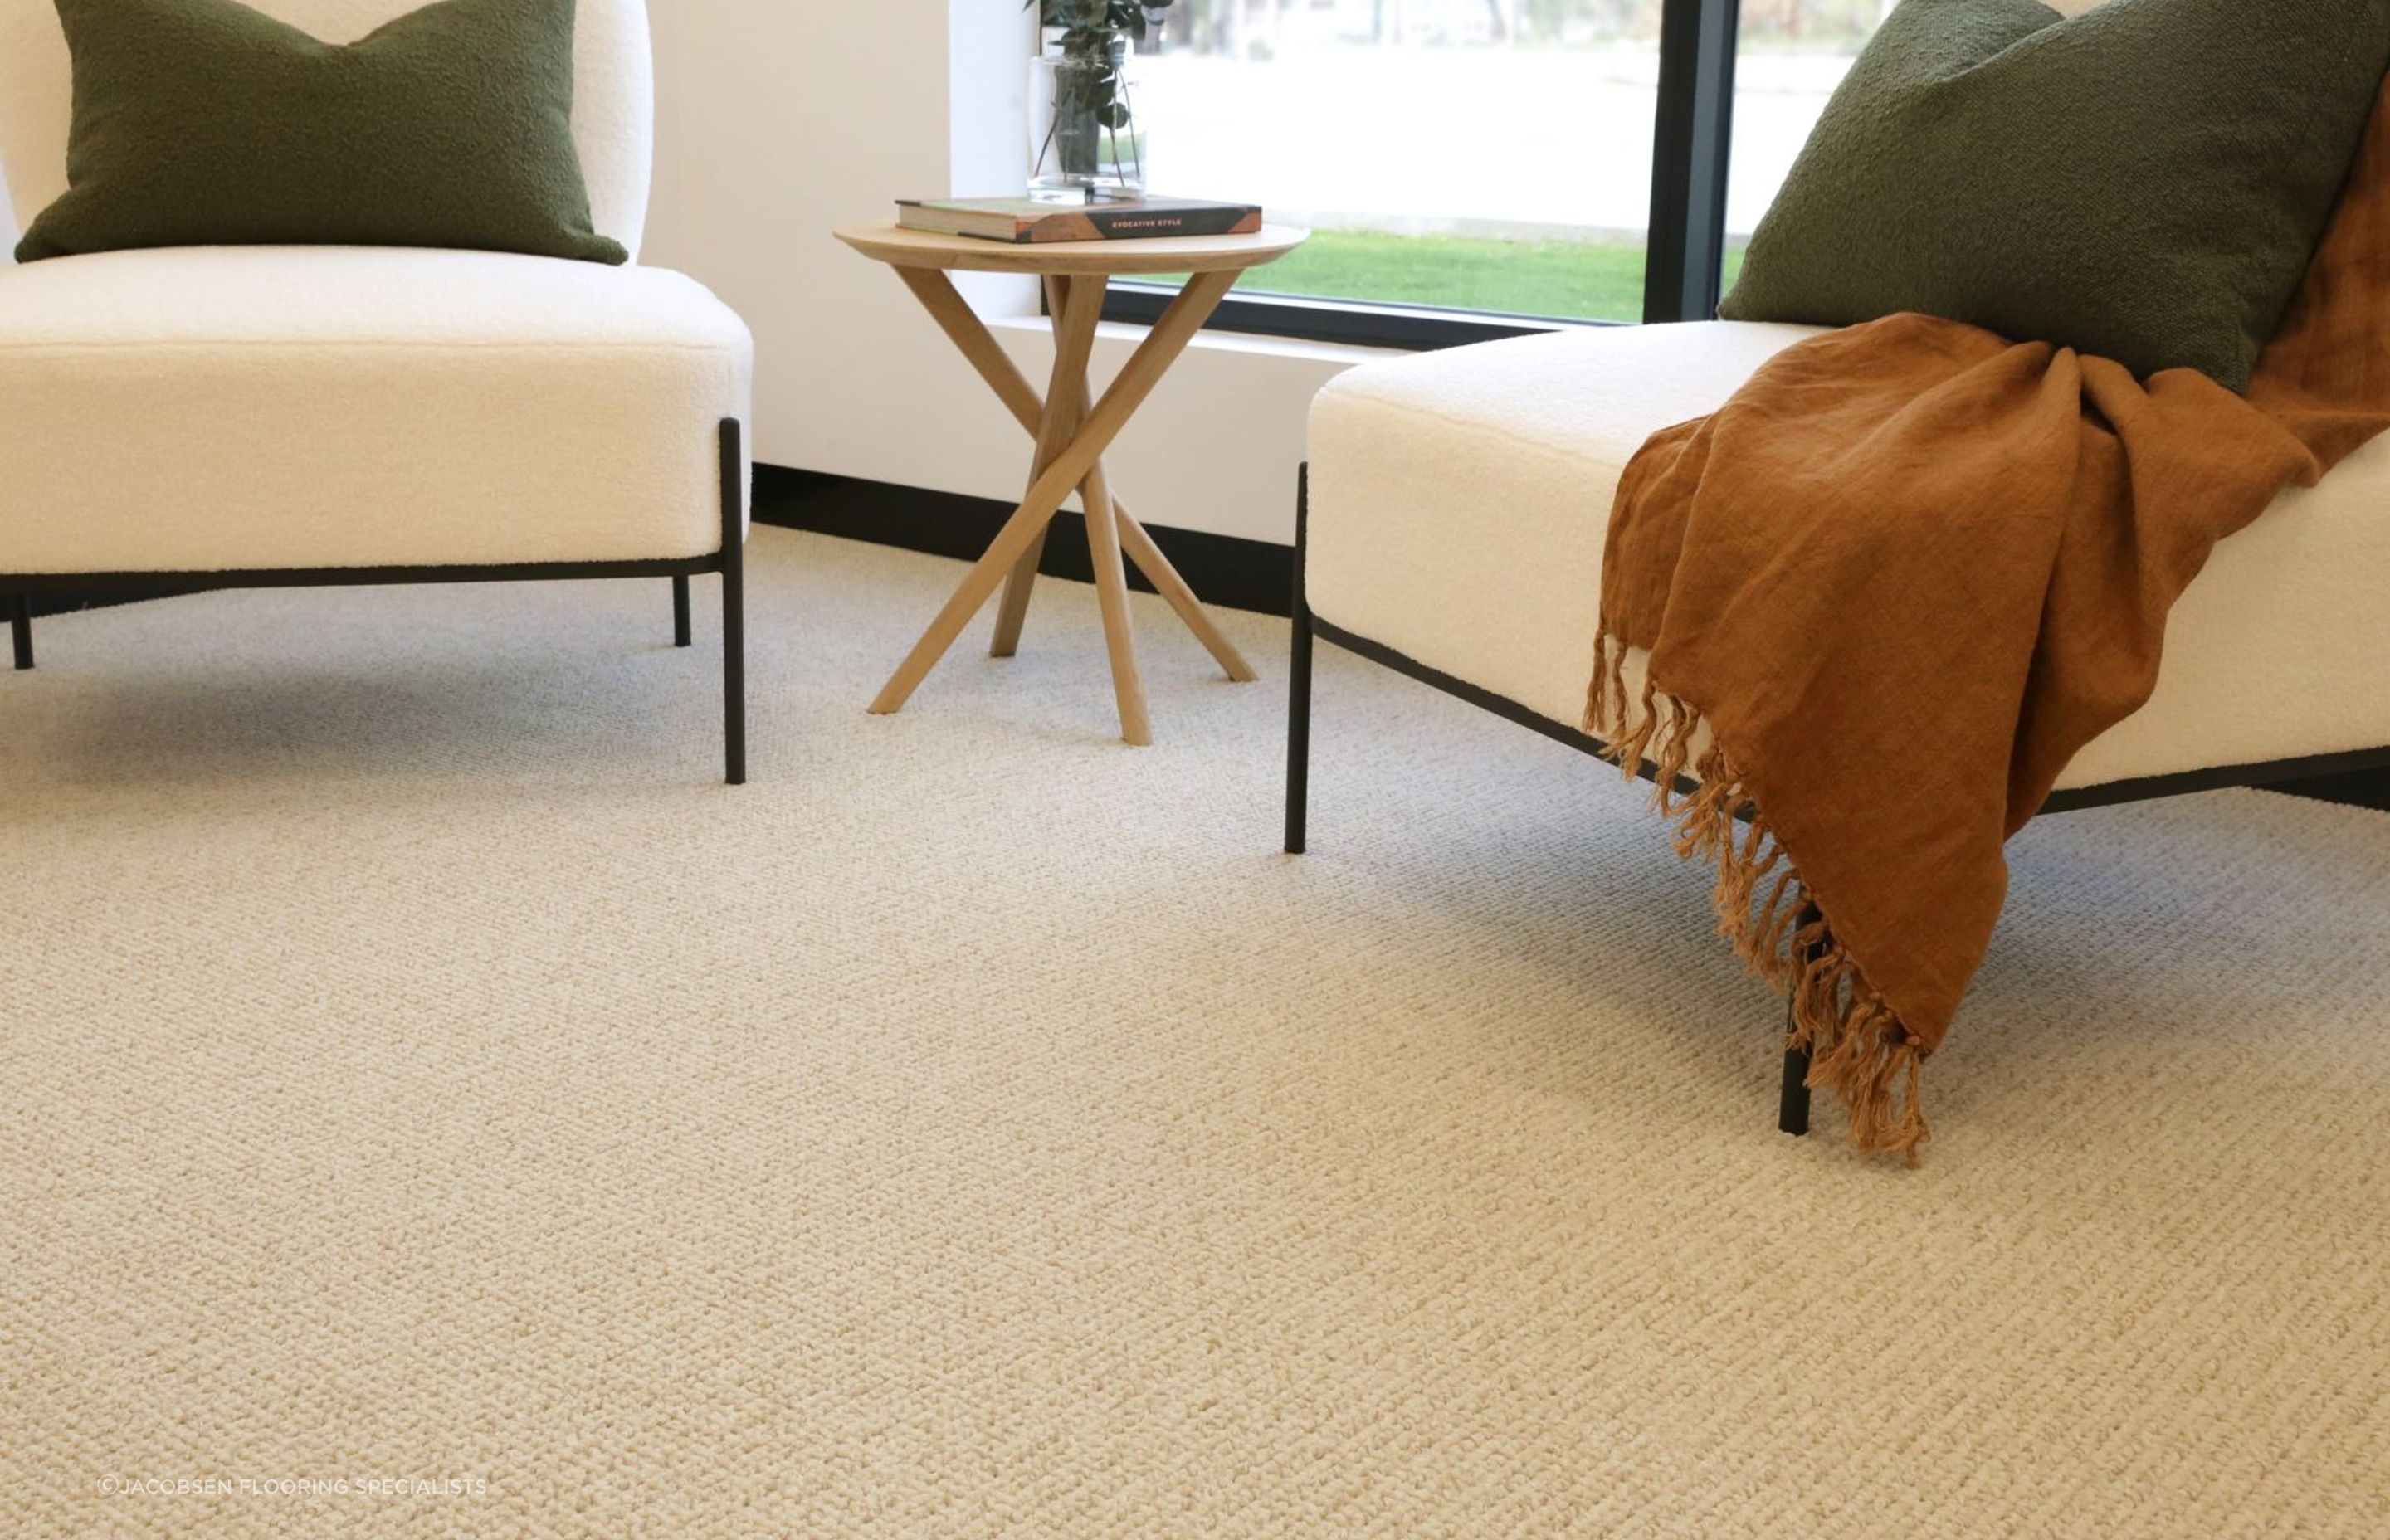 Orchard Loop Pile Textured Carpet offers supreme comfort, has track-resistant construction and a rich, tactile texture.